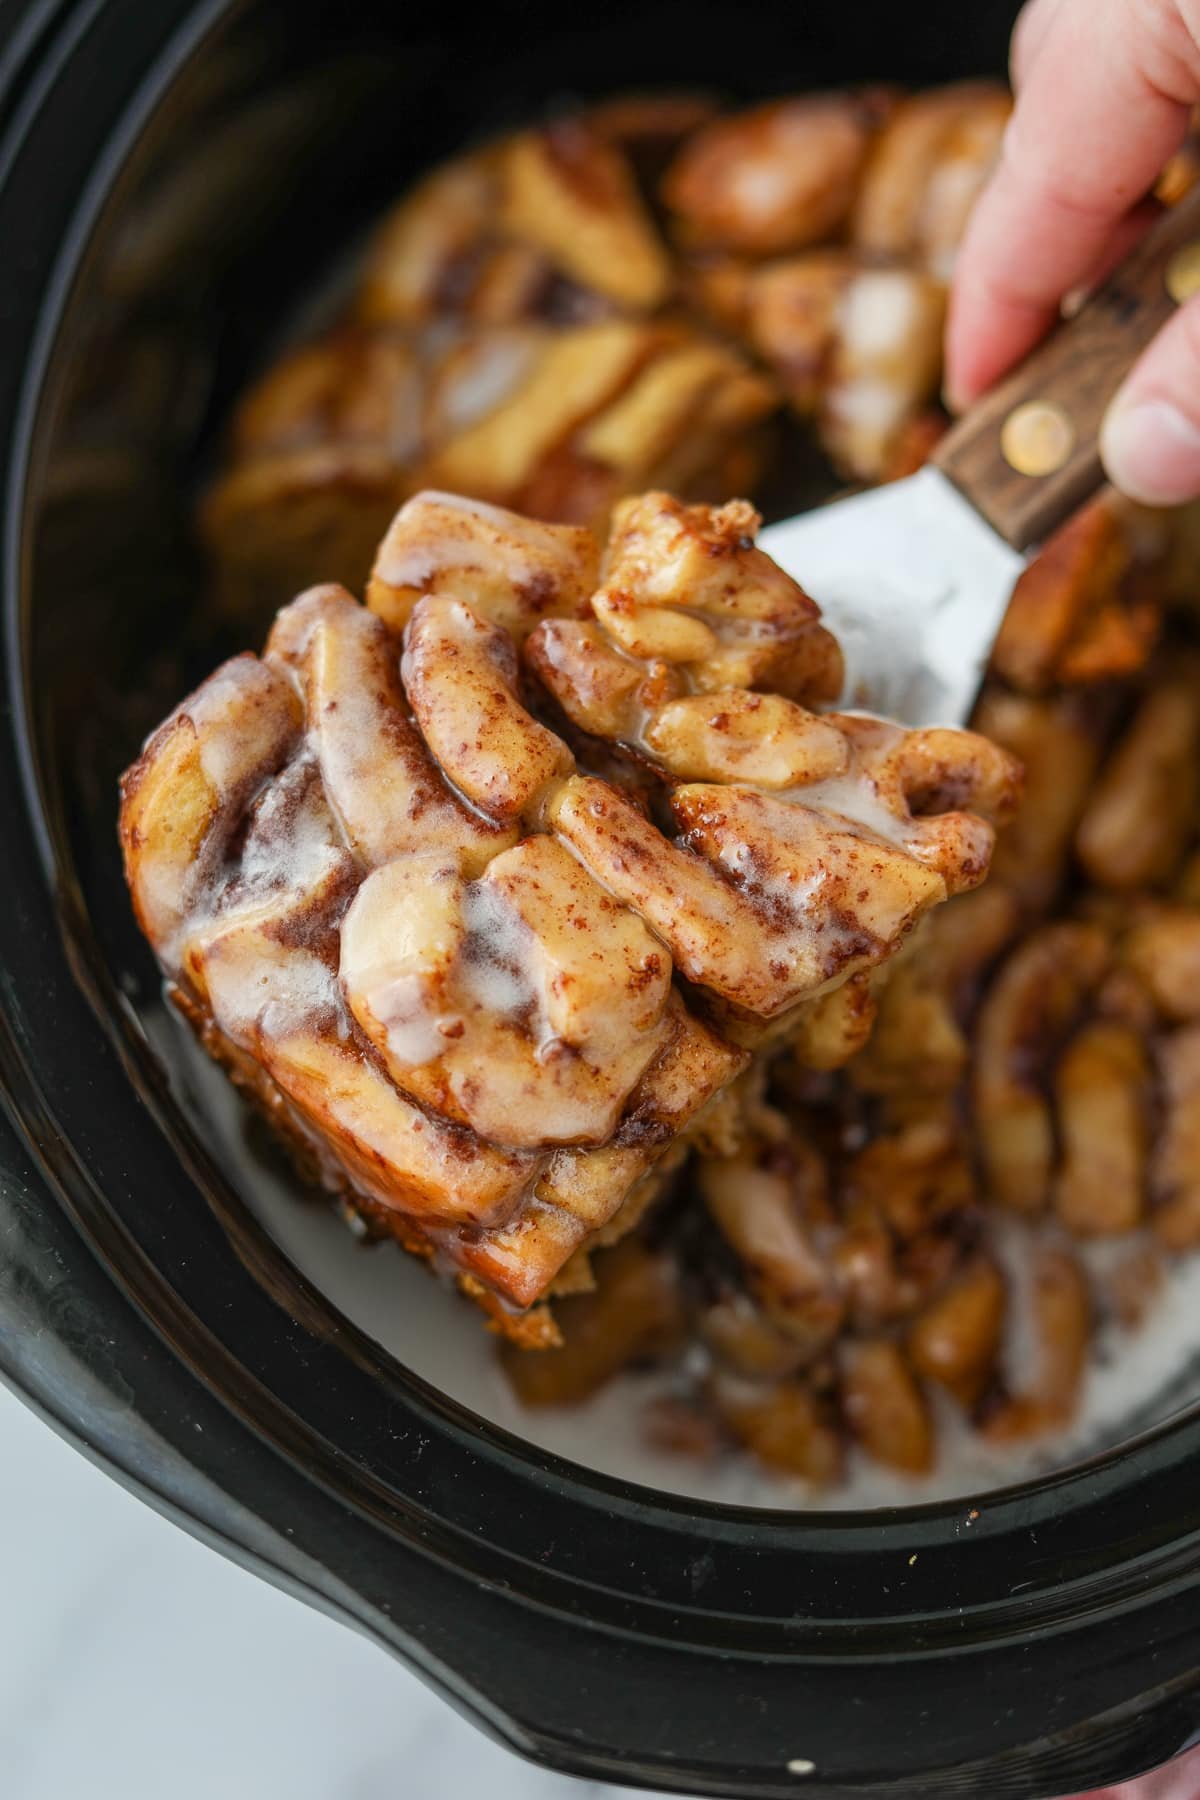 Taking a portion of crock pot cinnamon rolls from a slow cooker.